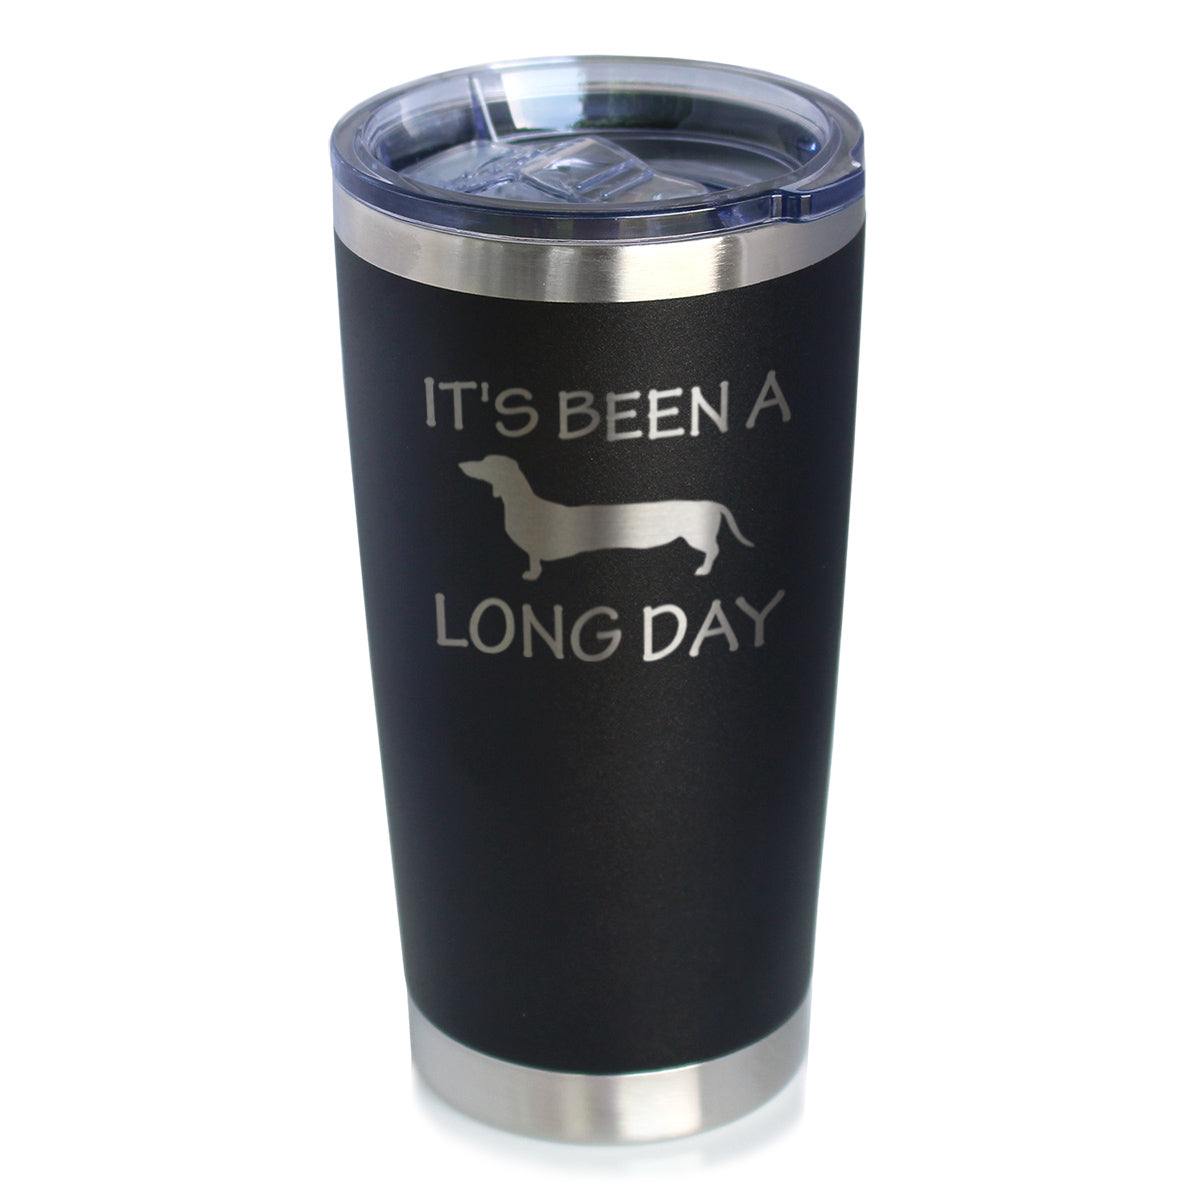 Long Day - Insulated Coffee Tumbler Cup with Sliding Lid - Stainless Steel Insulated Mug - Dog Themed Coffee Gifts